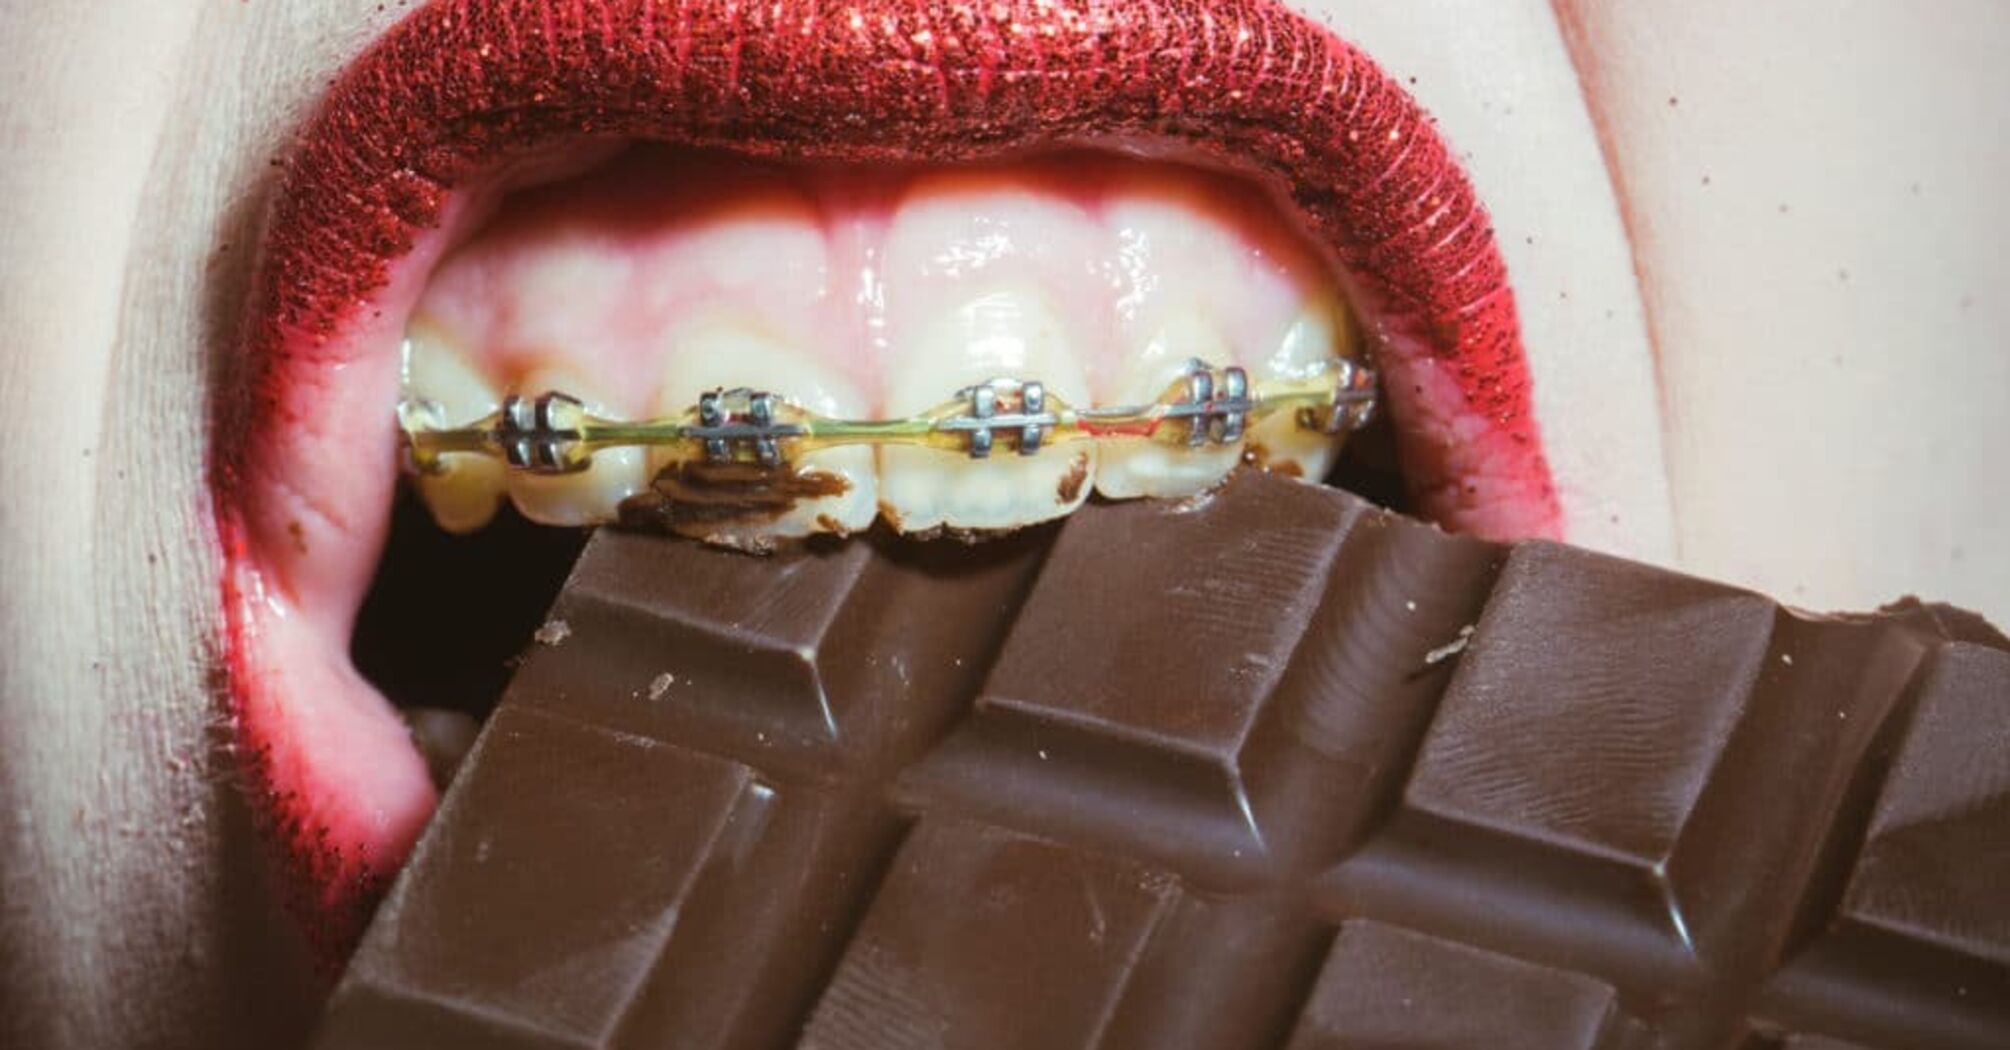 What you can and cannot eat with braces